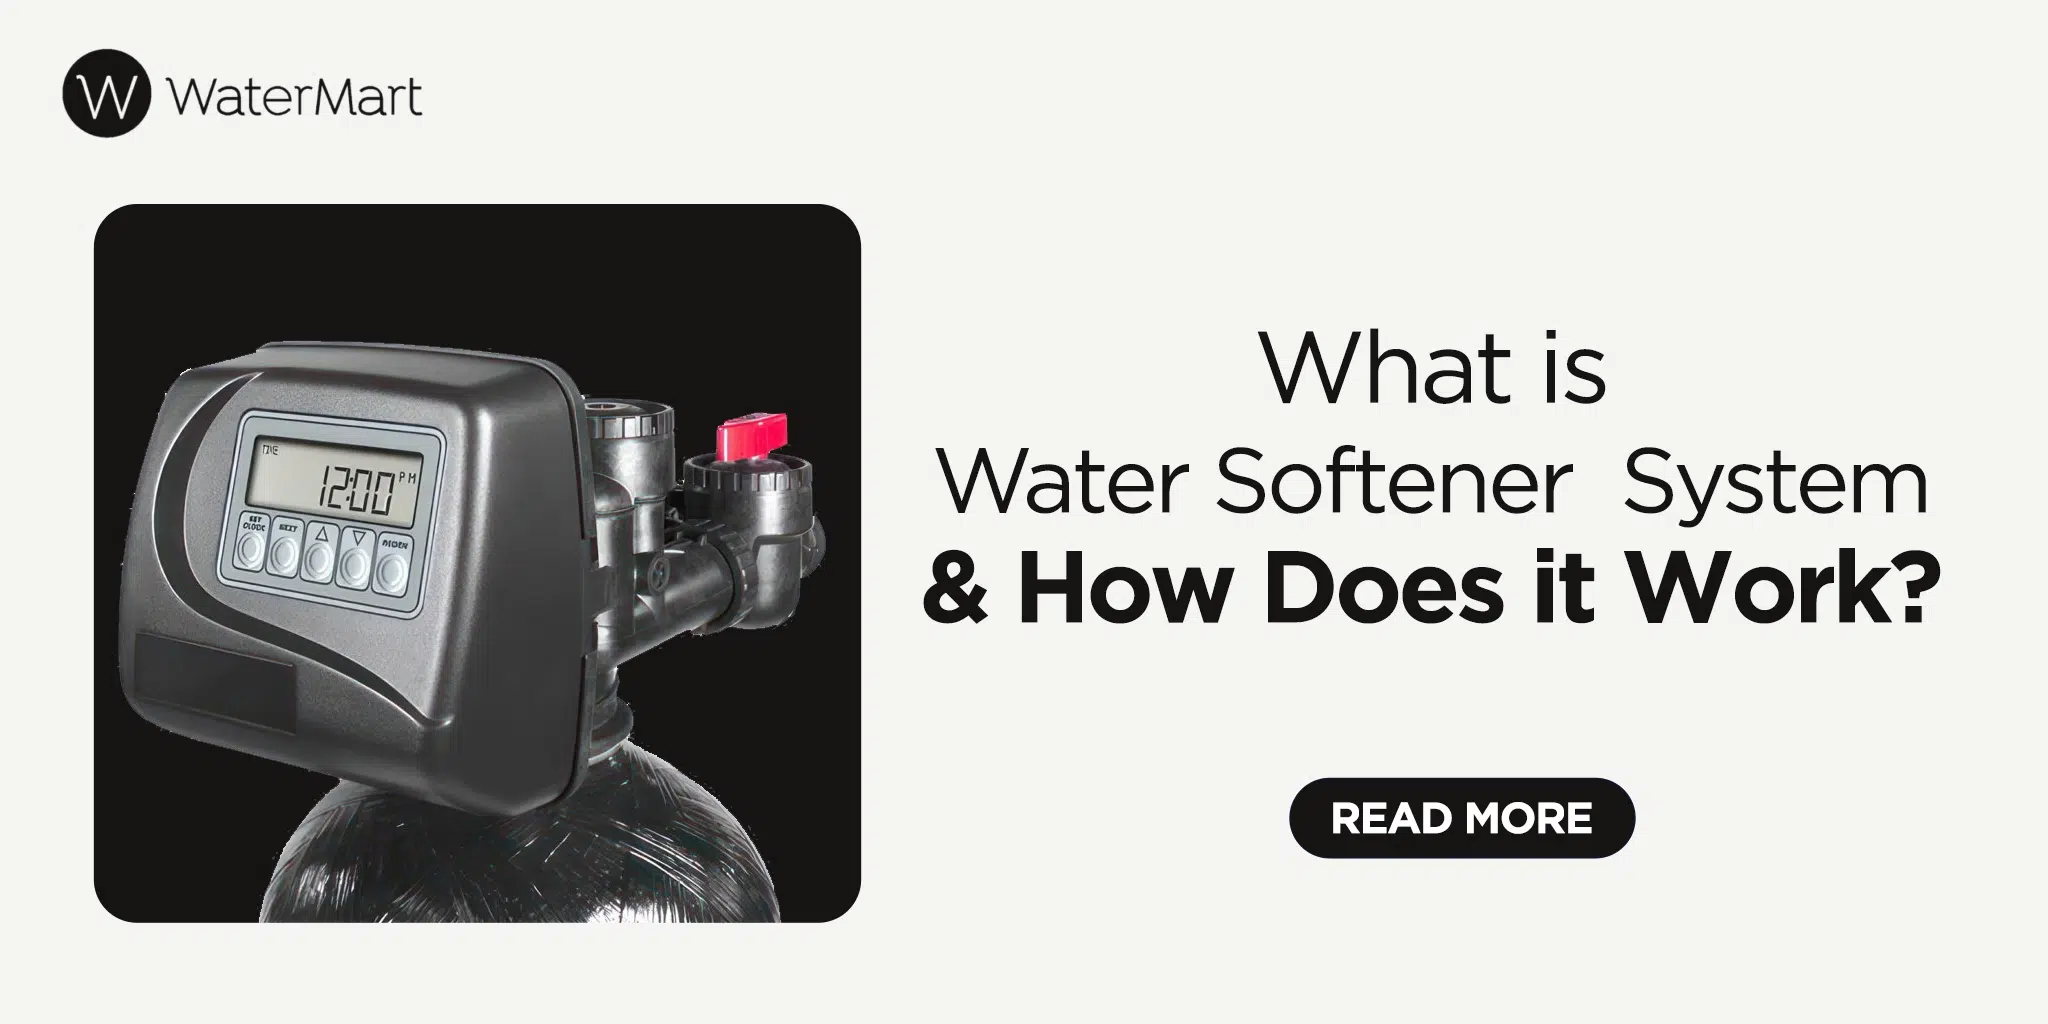 What is Water Softener System & How Does it Work?